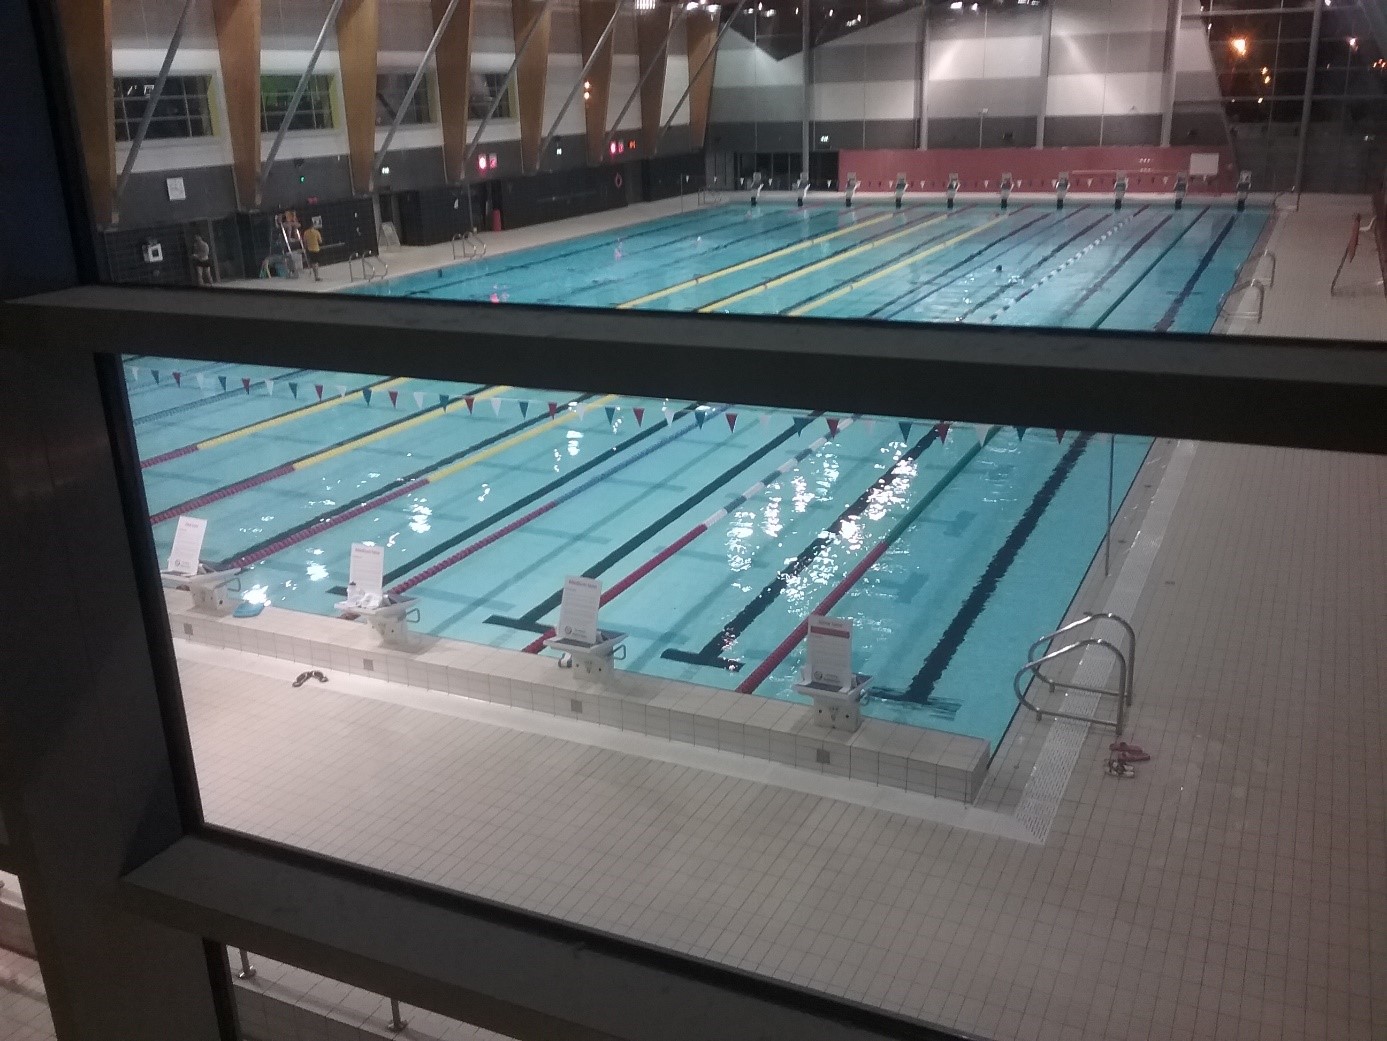 The swimming pool at UCD. (Foto: Maxence Gueritot 2019).